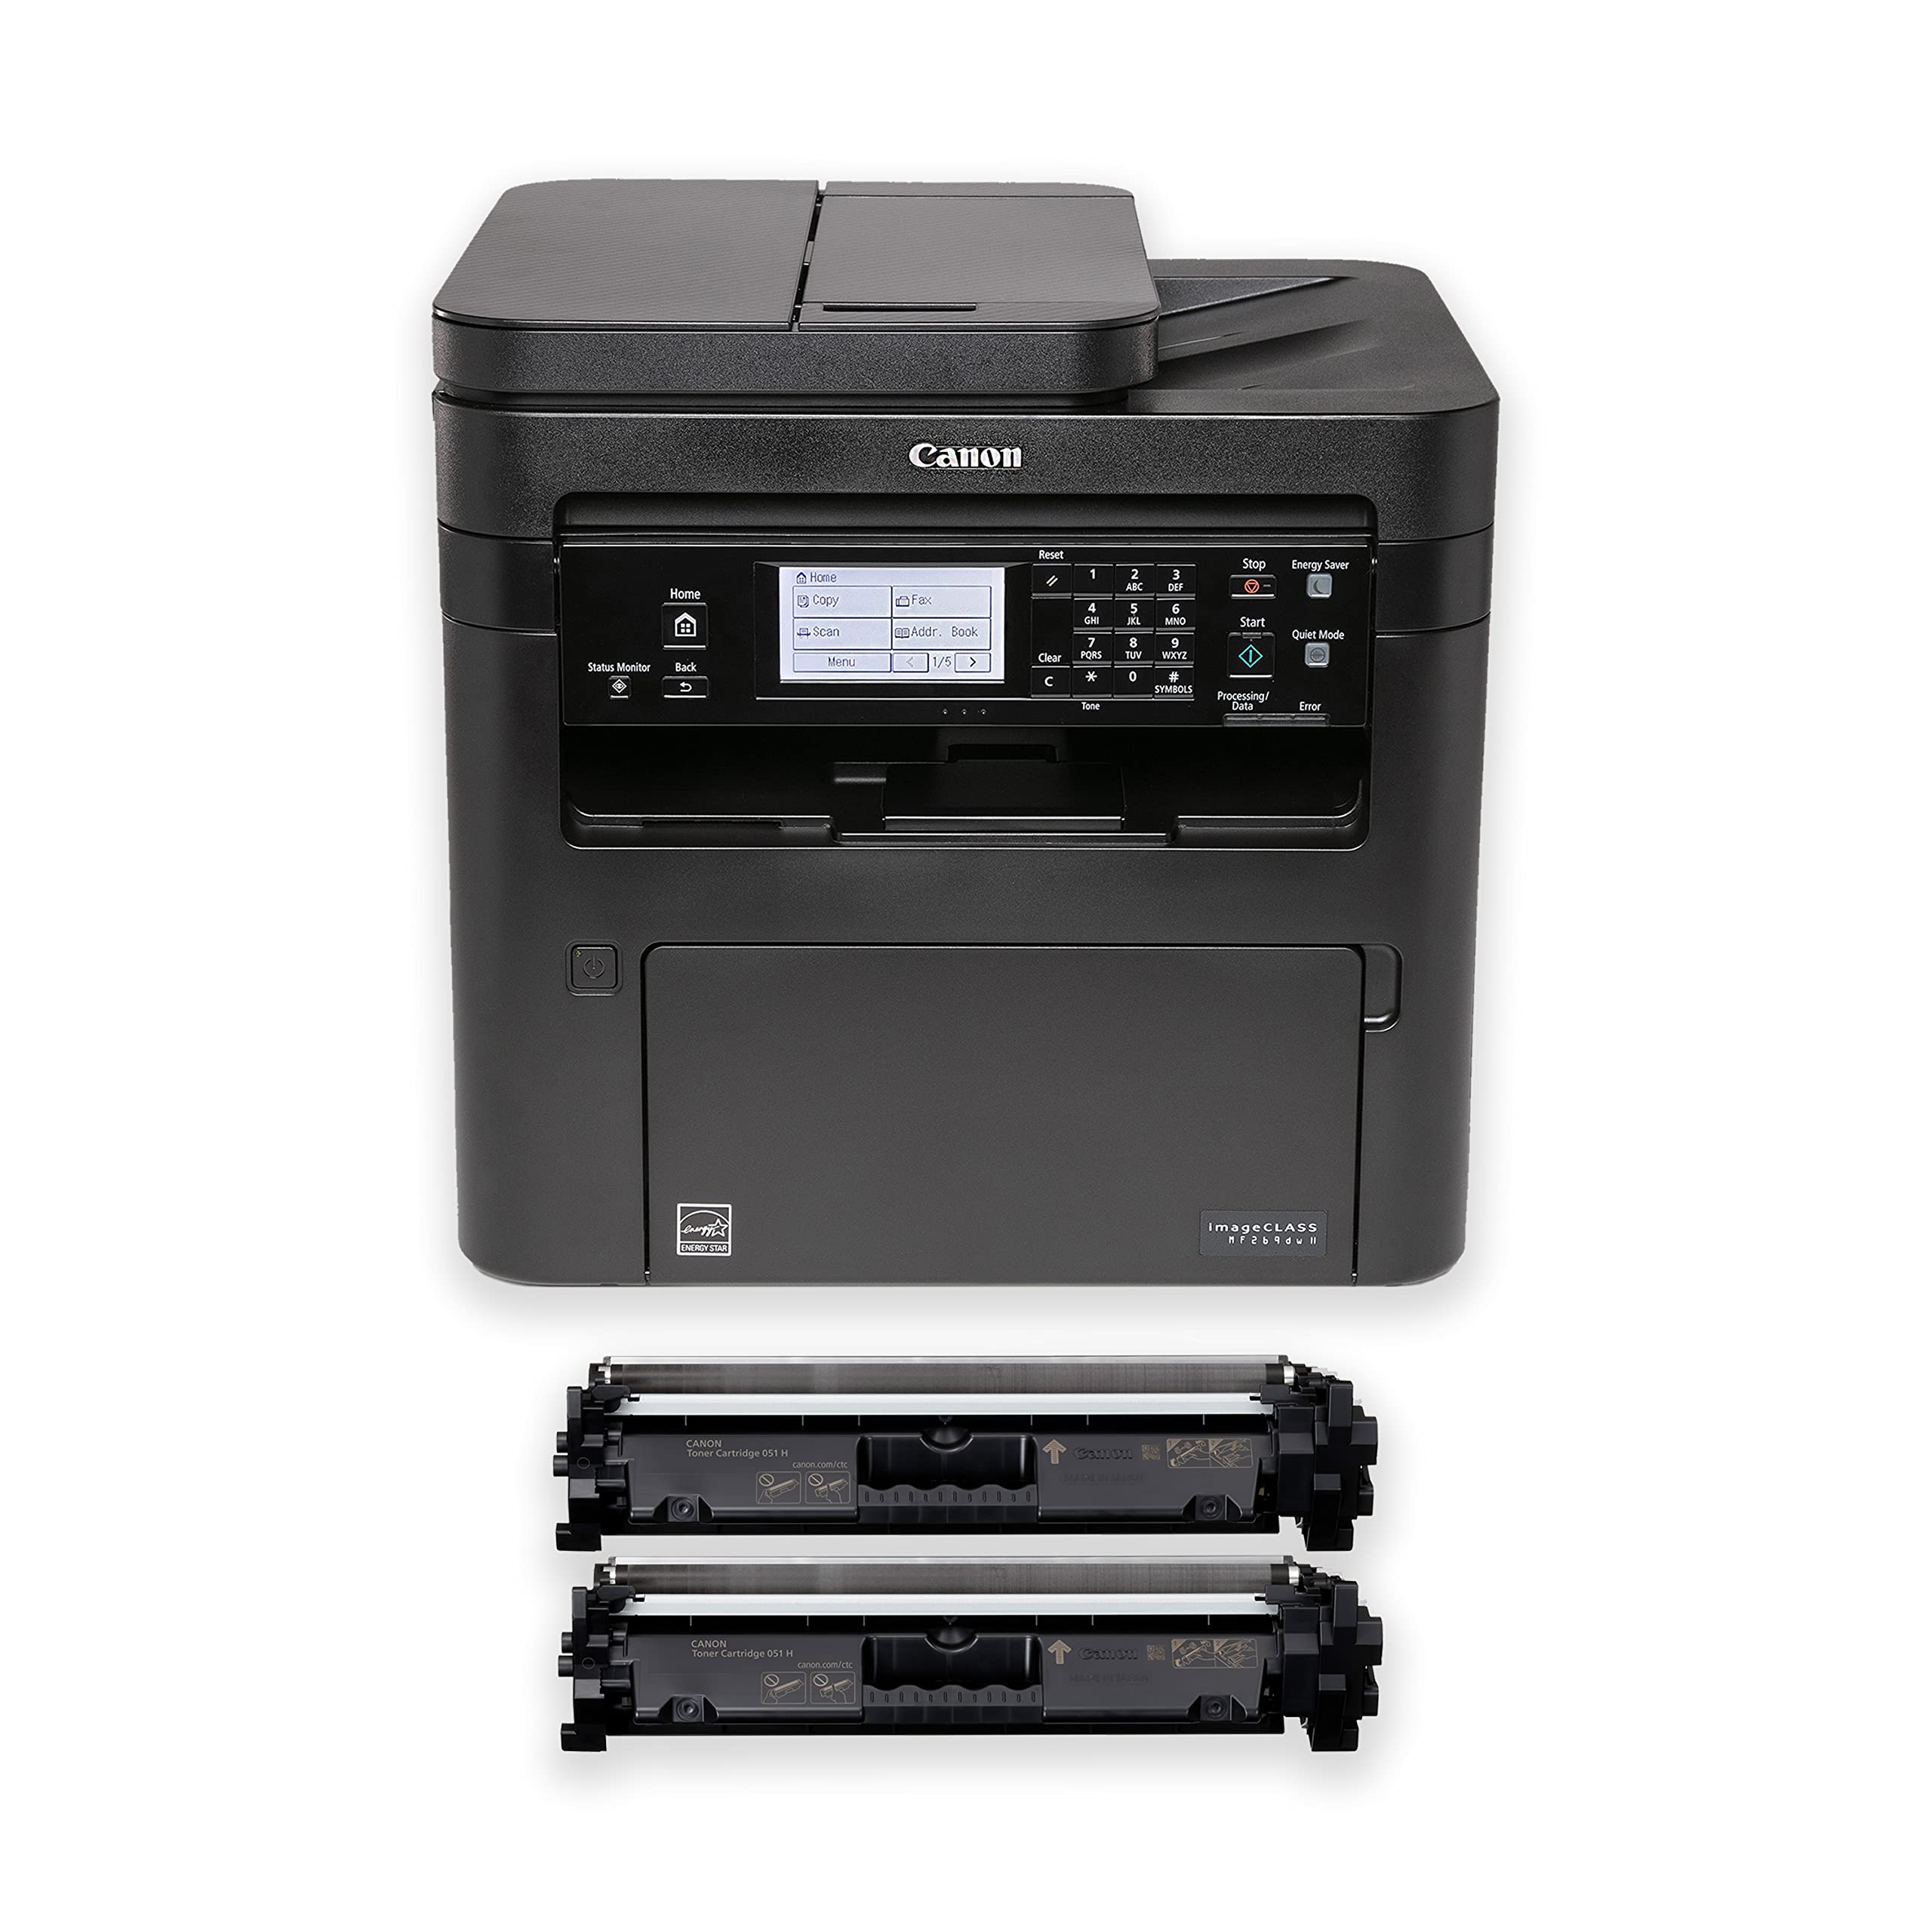 Canon imageCLASS MF269dw II VP - All in One, Wireless, Duplex Laser Printer with 2 High Capacity Toners, Works with Alexa